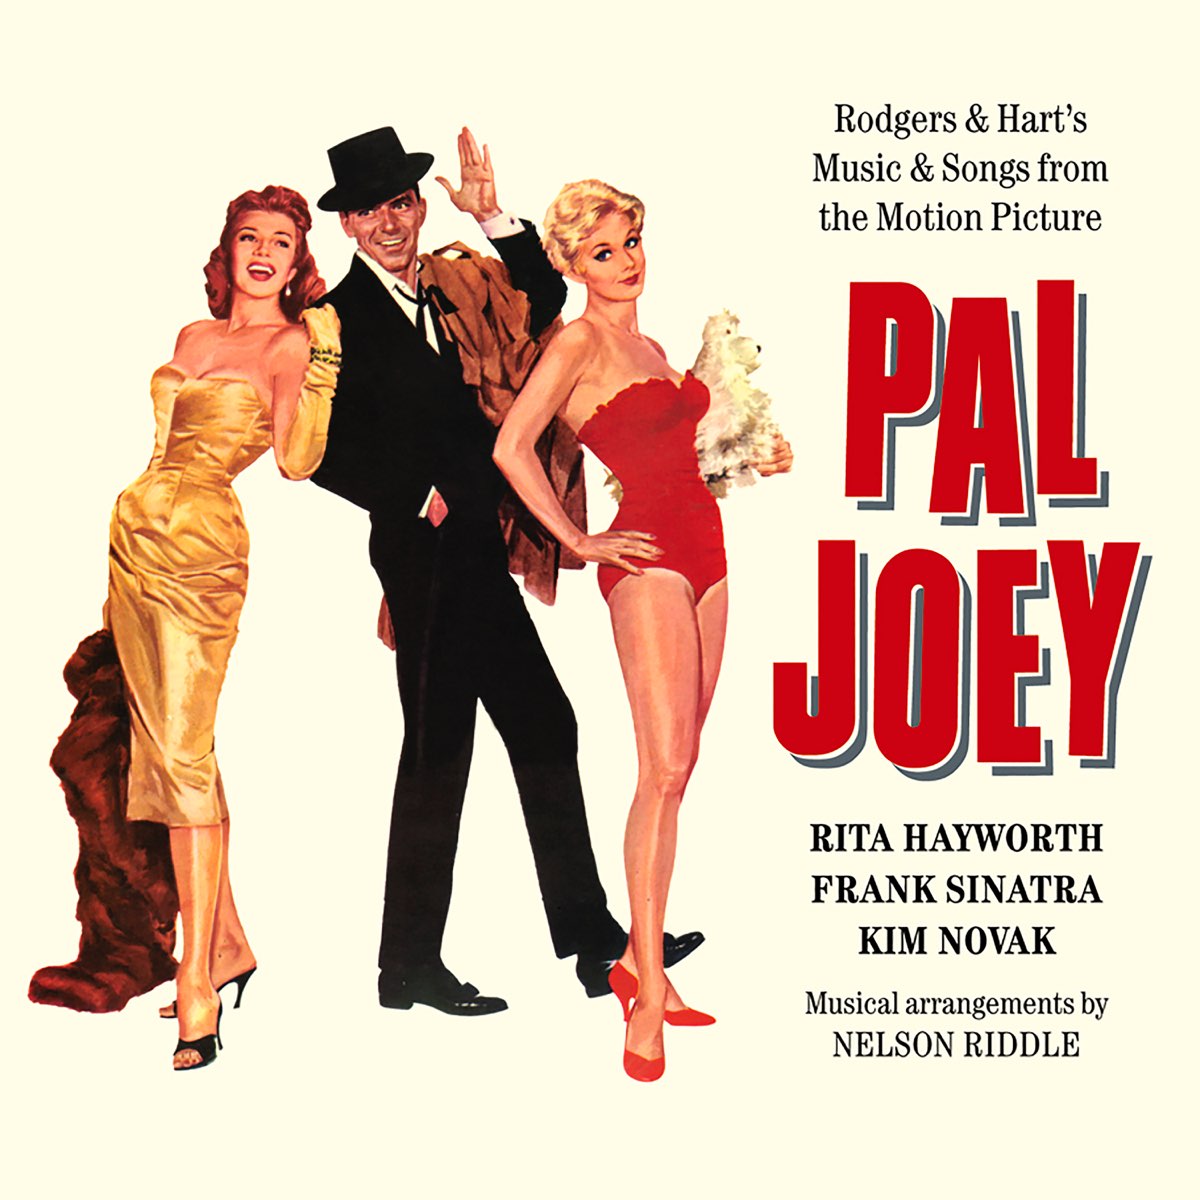 Pal Joey 1957 Motion Picture Rodgers & Hammerstein